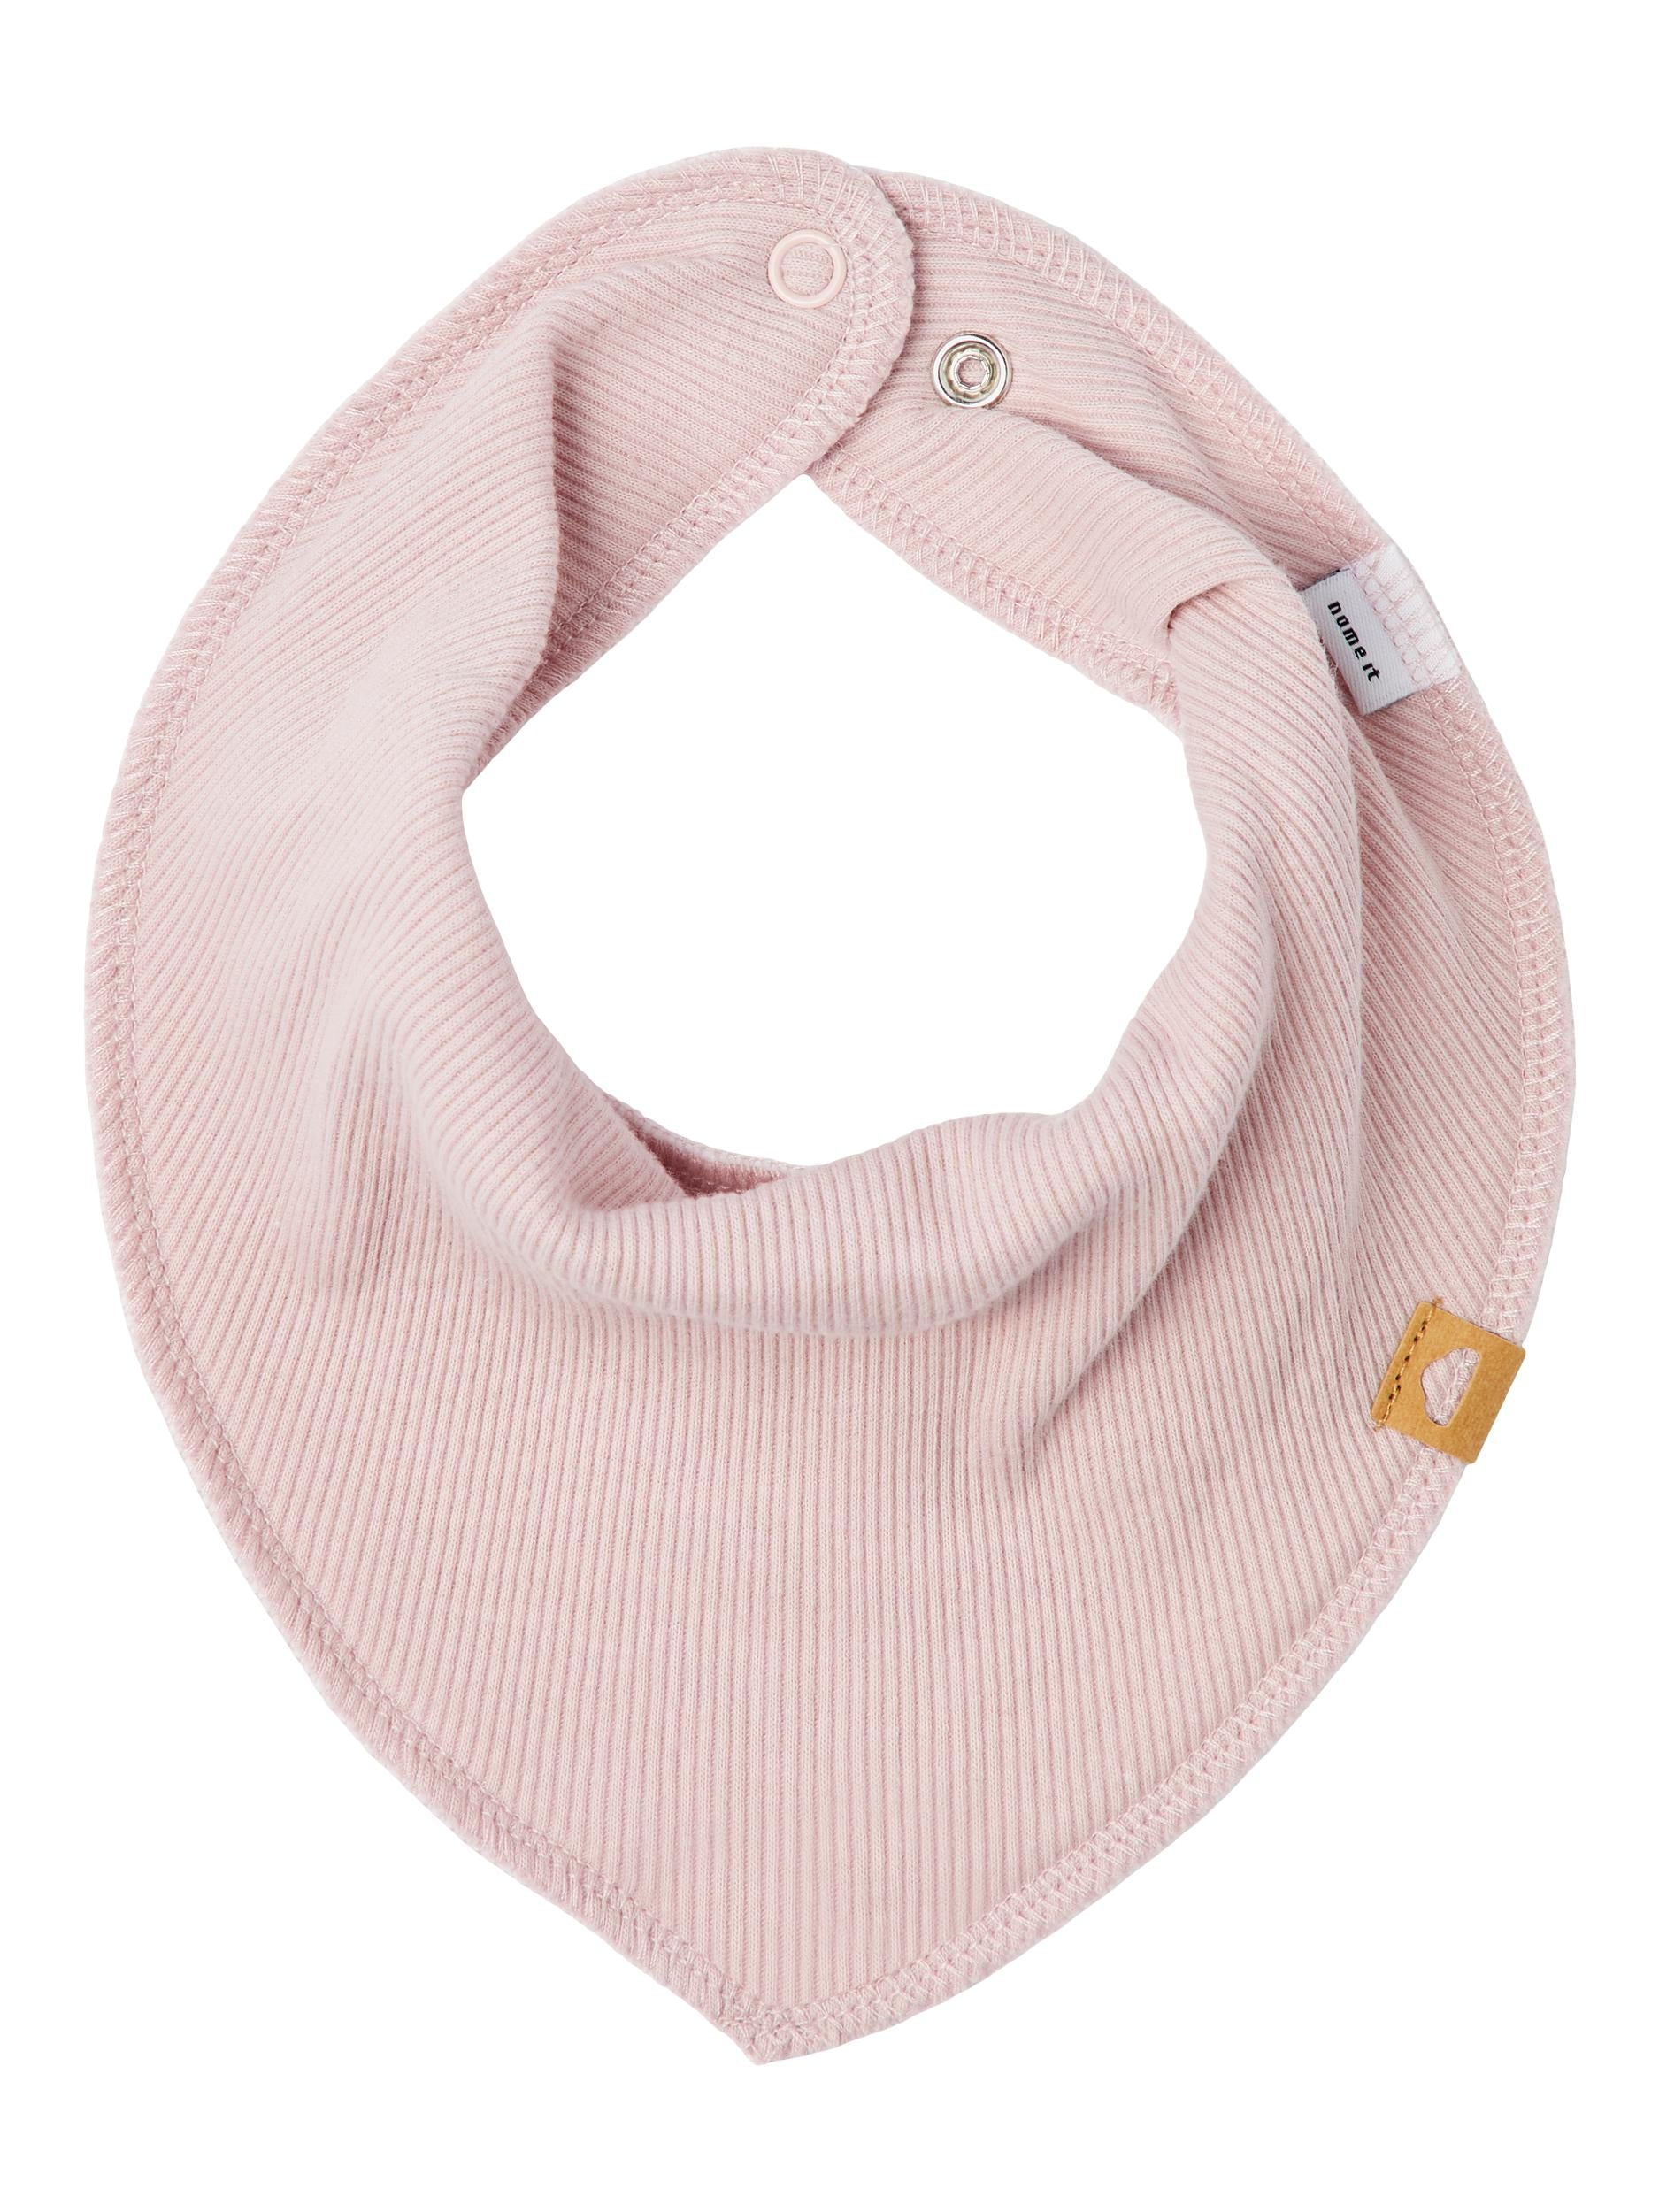 Yvettelaila Girl's Scarf Bib/Burnished Lilac-Front View